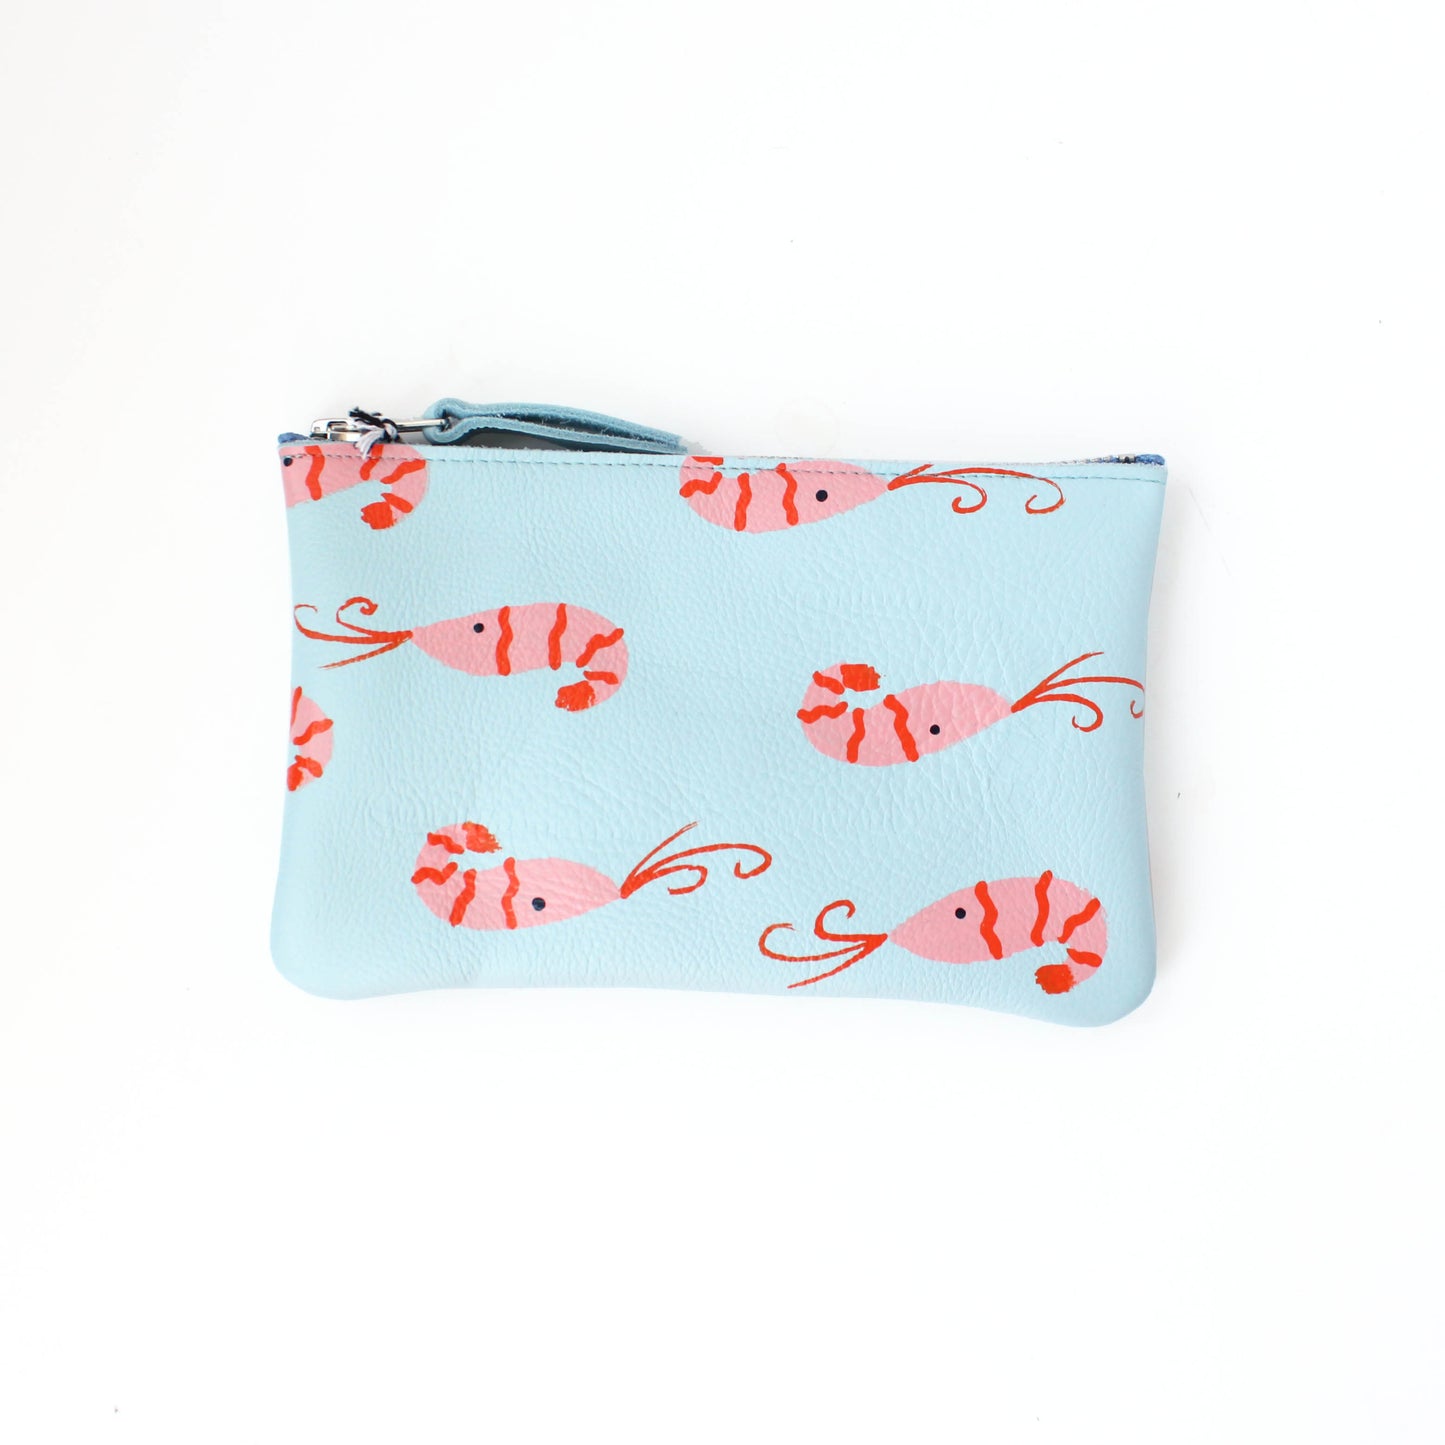 Hand-Painted Prawn Zip Pouch